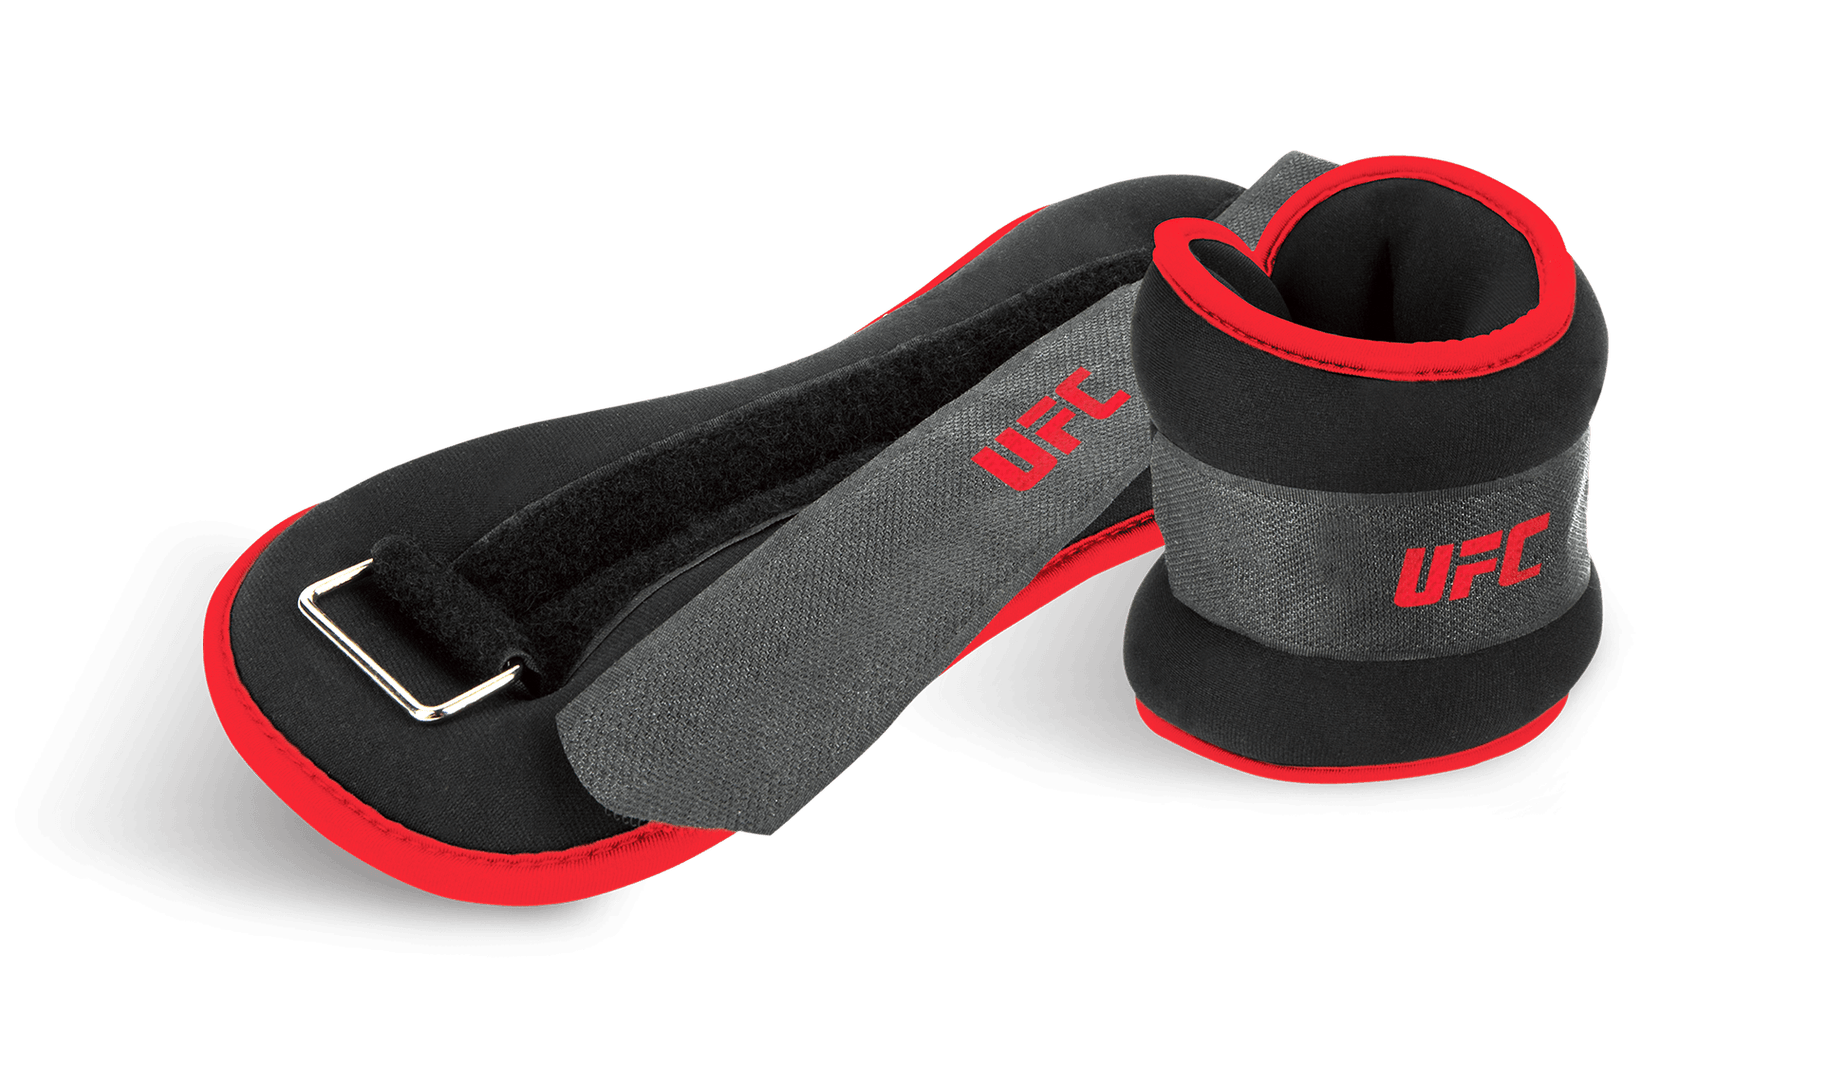 UFC Ankle Weights 2 x 1kg - Contact Us for Professionals Discount Pricing. - Musclemania Fitness MegaStore